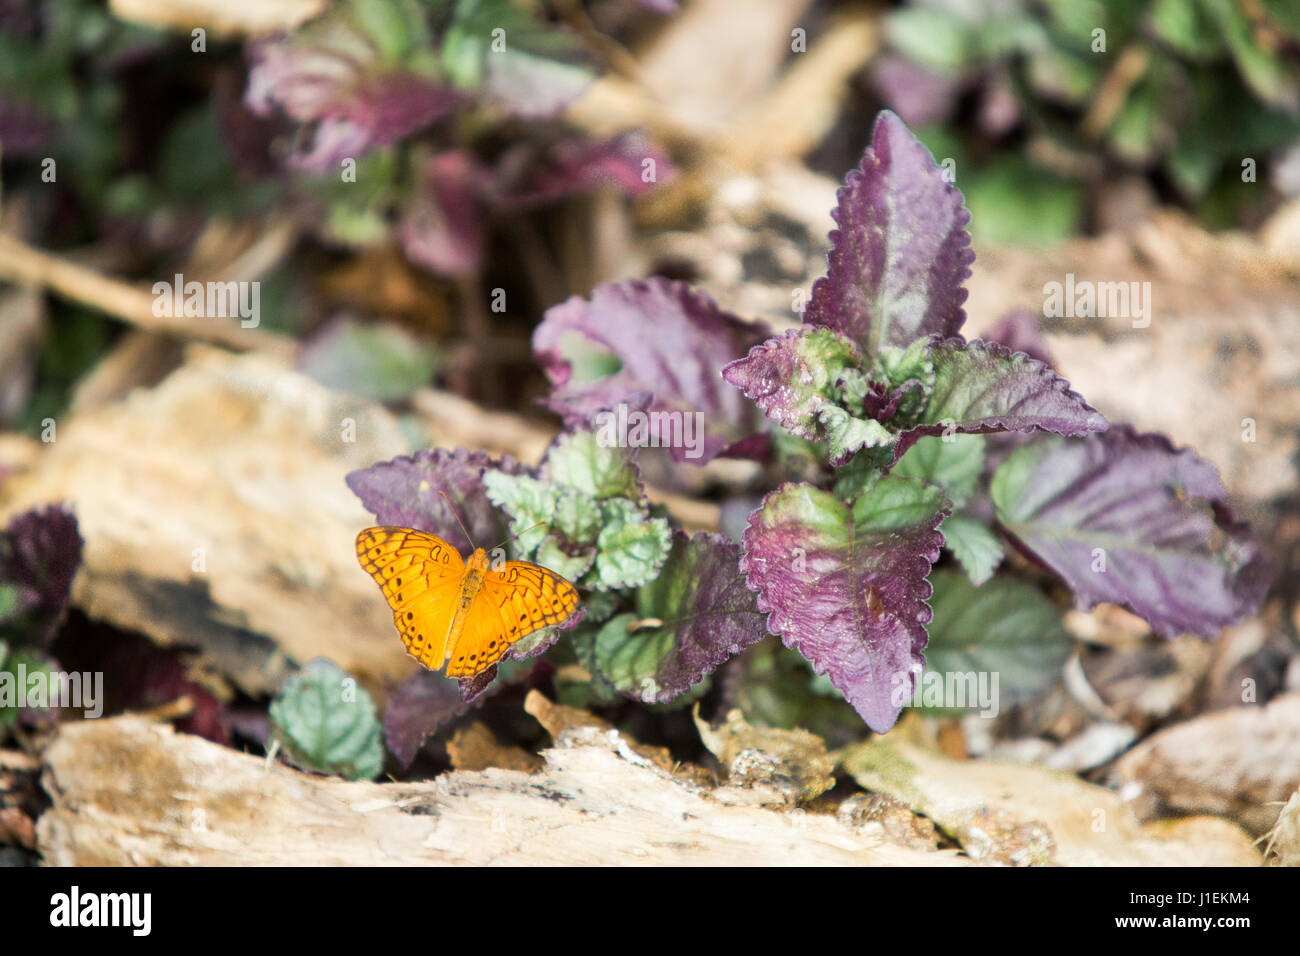 A frittilary butterfly rests on a colorful plant in the tropical botanical gardens of Casa Orquideas. Stock Photo